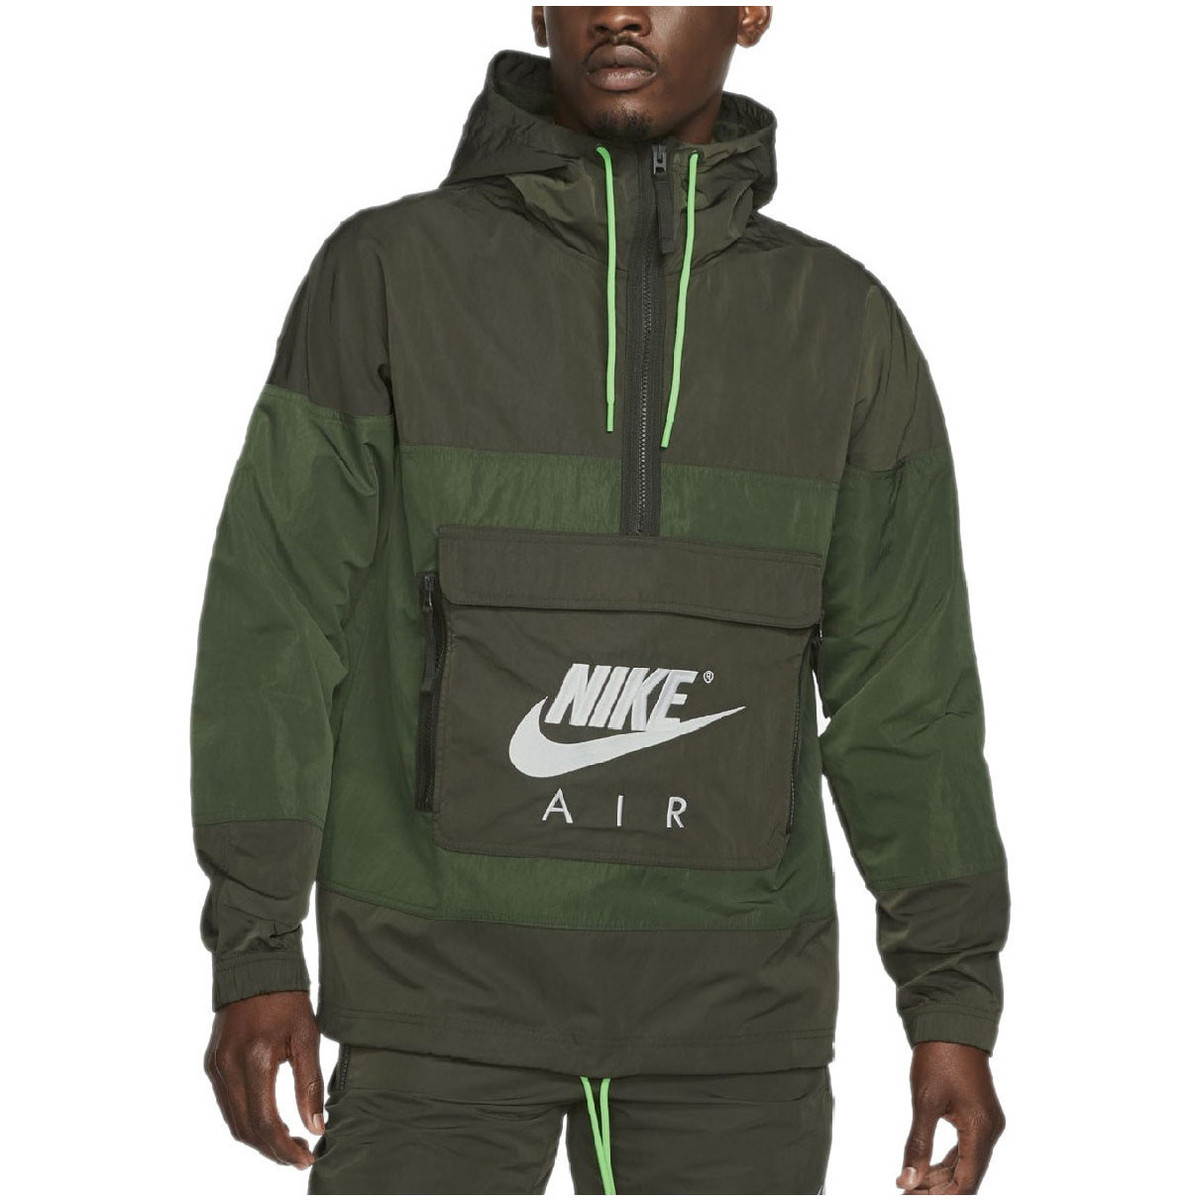 Nike Vert AIR UNLINED ANORAK zhJ7c0Ud